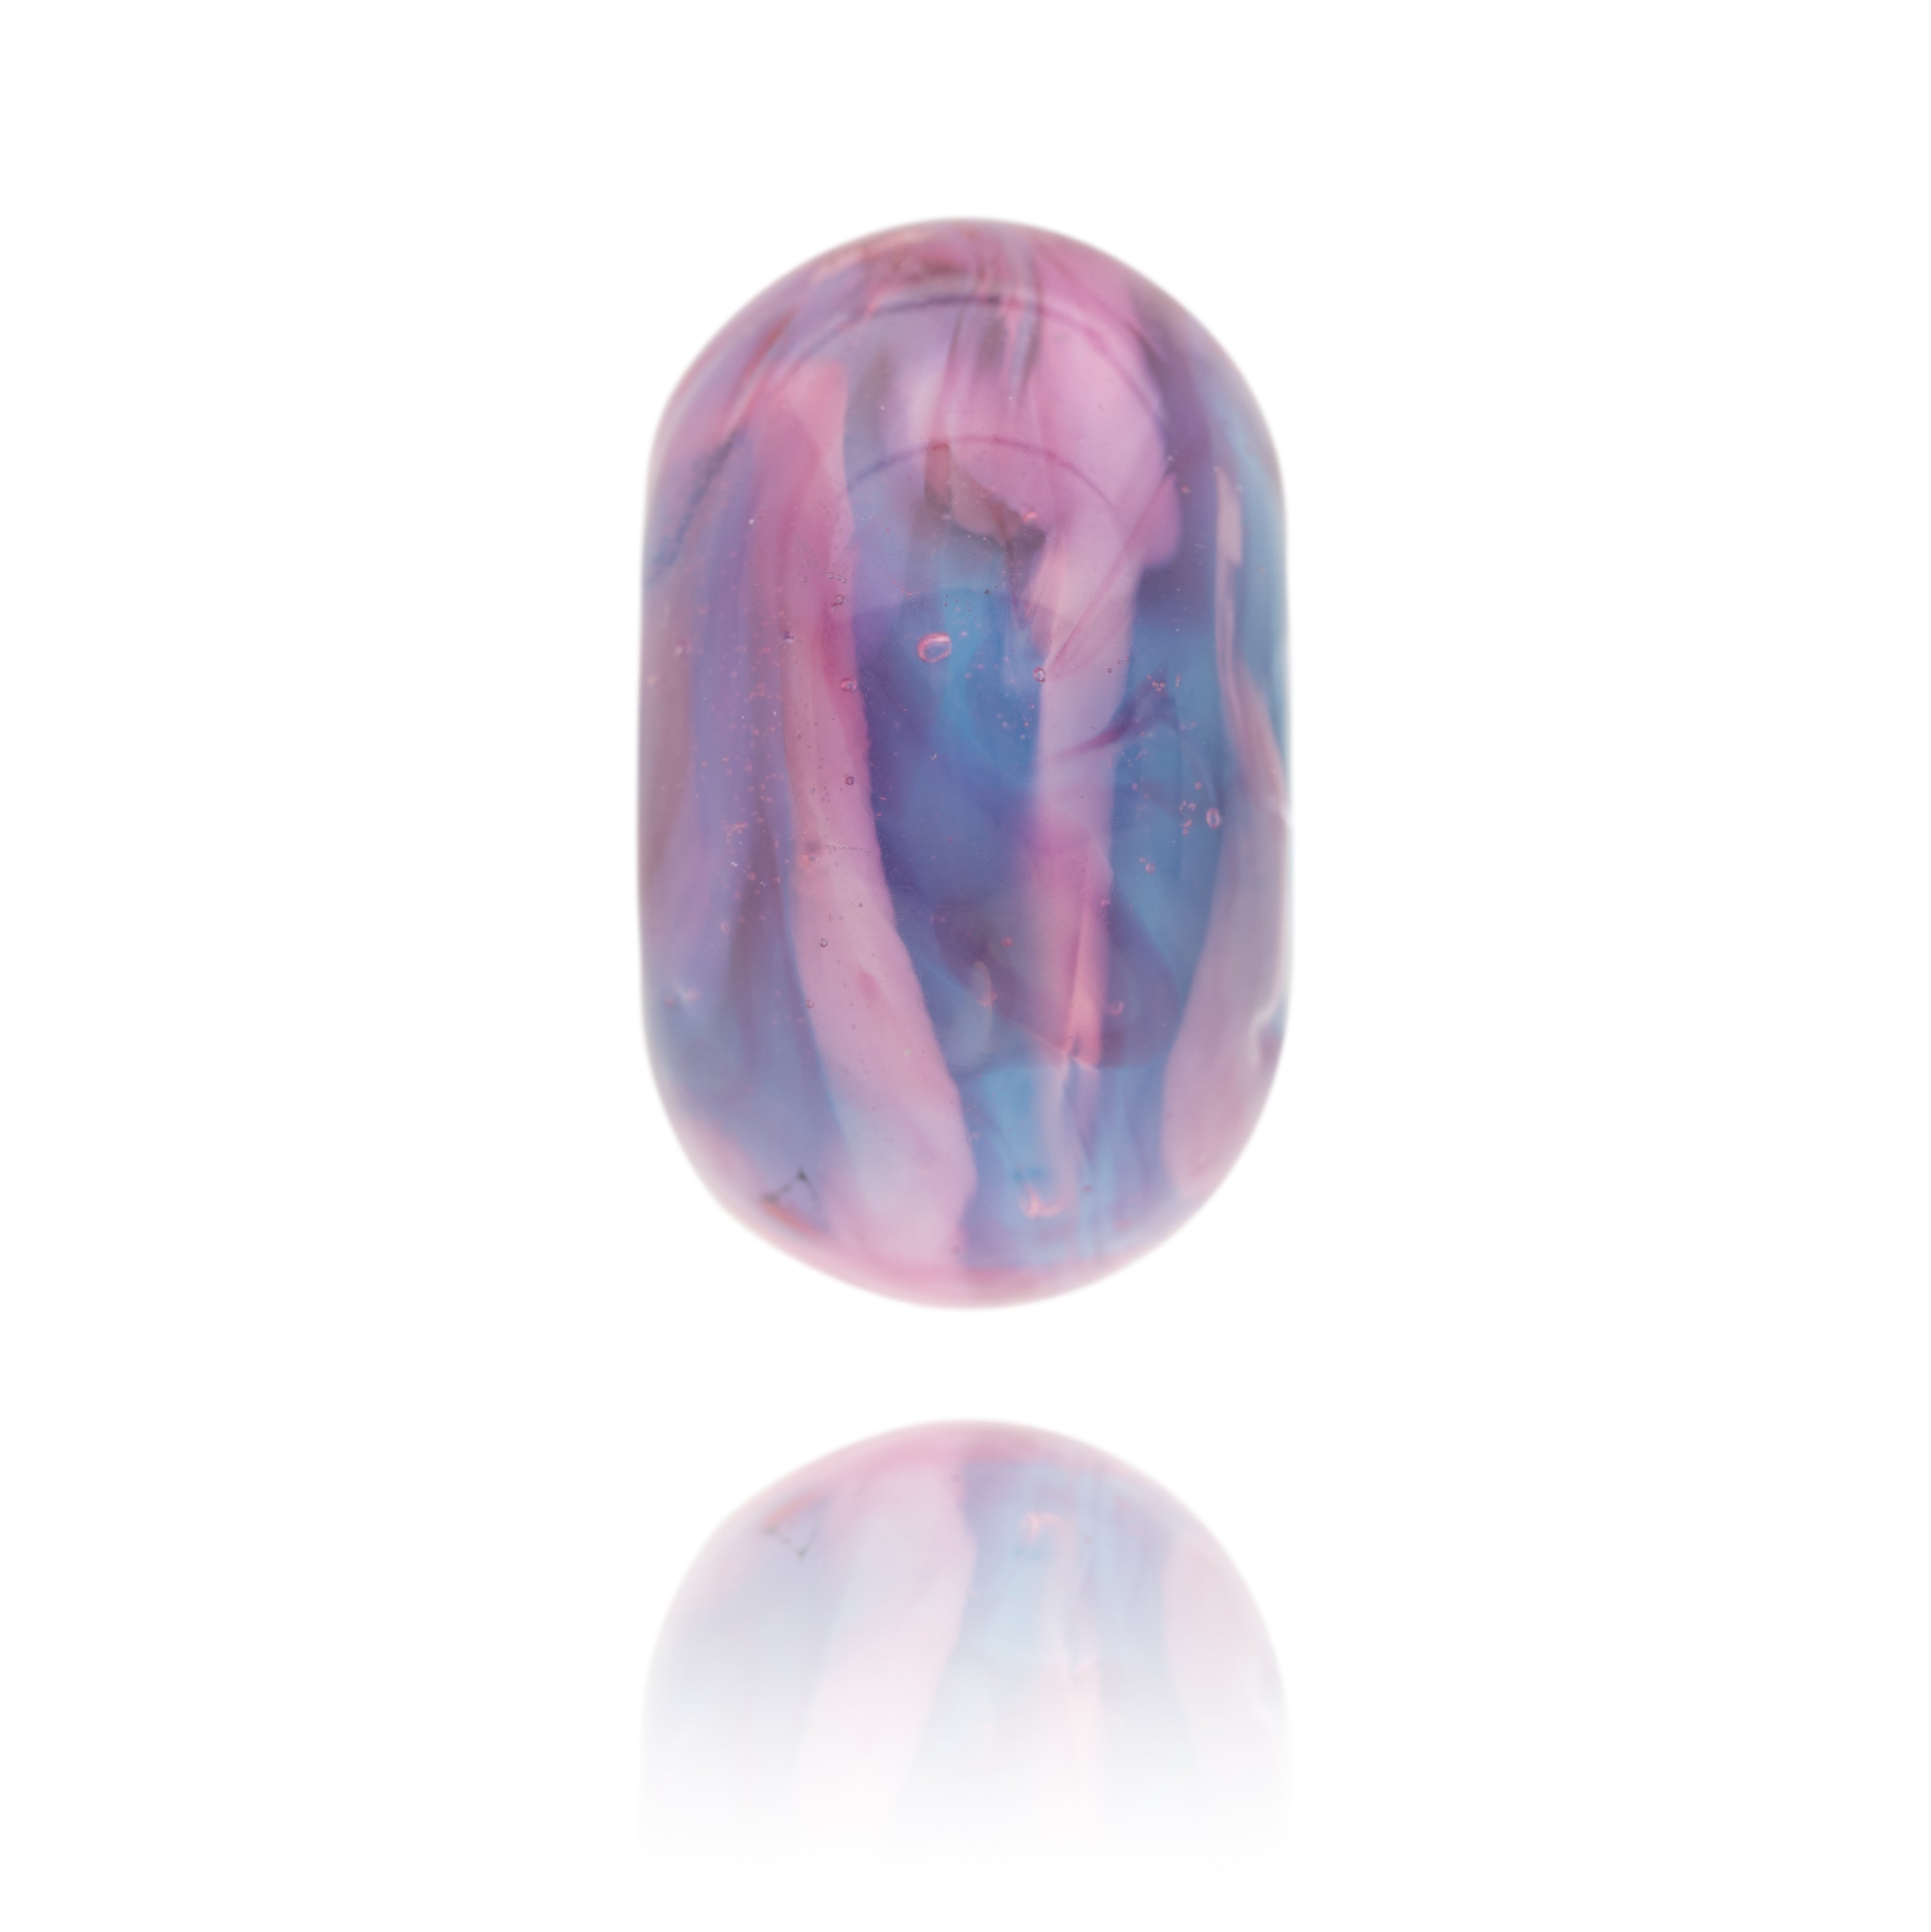 Pink and turquoise swirling glass bead representing Whitstable in Kent.